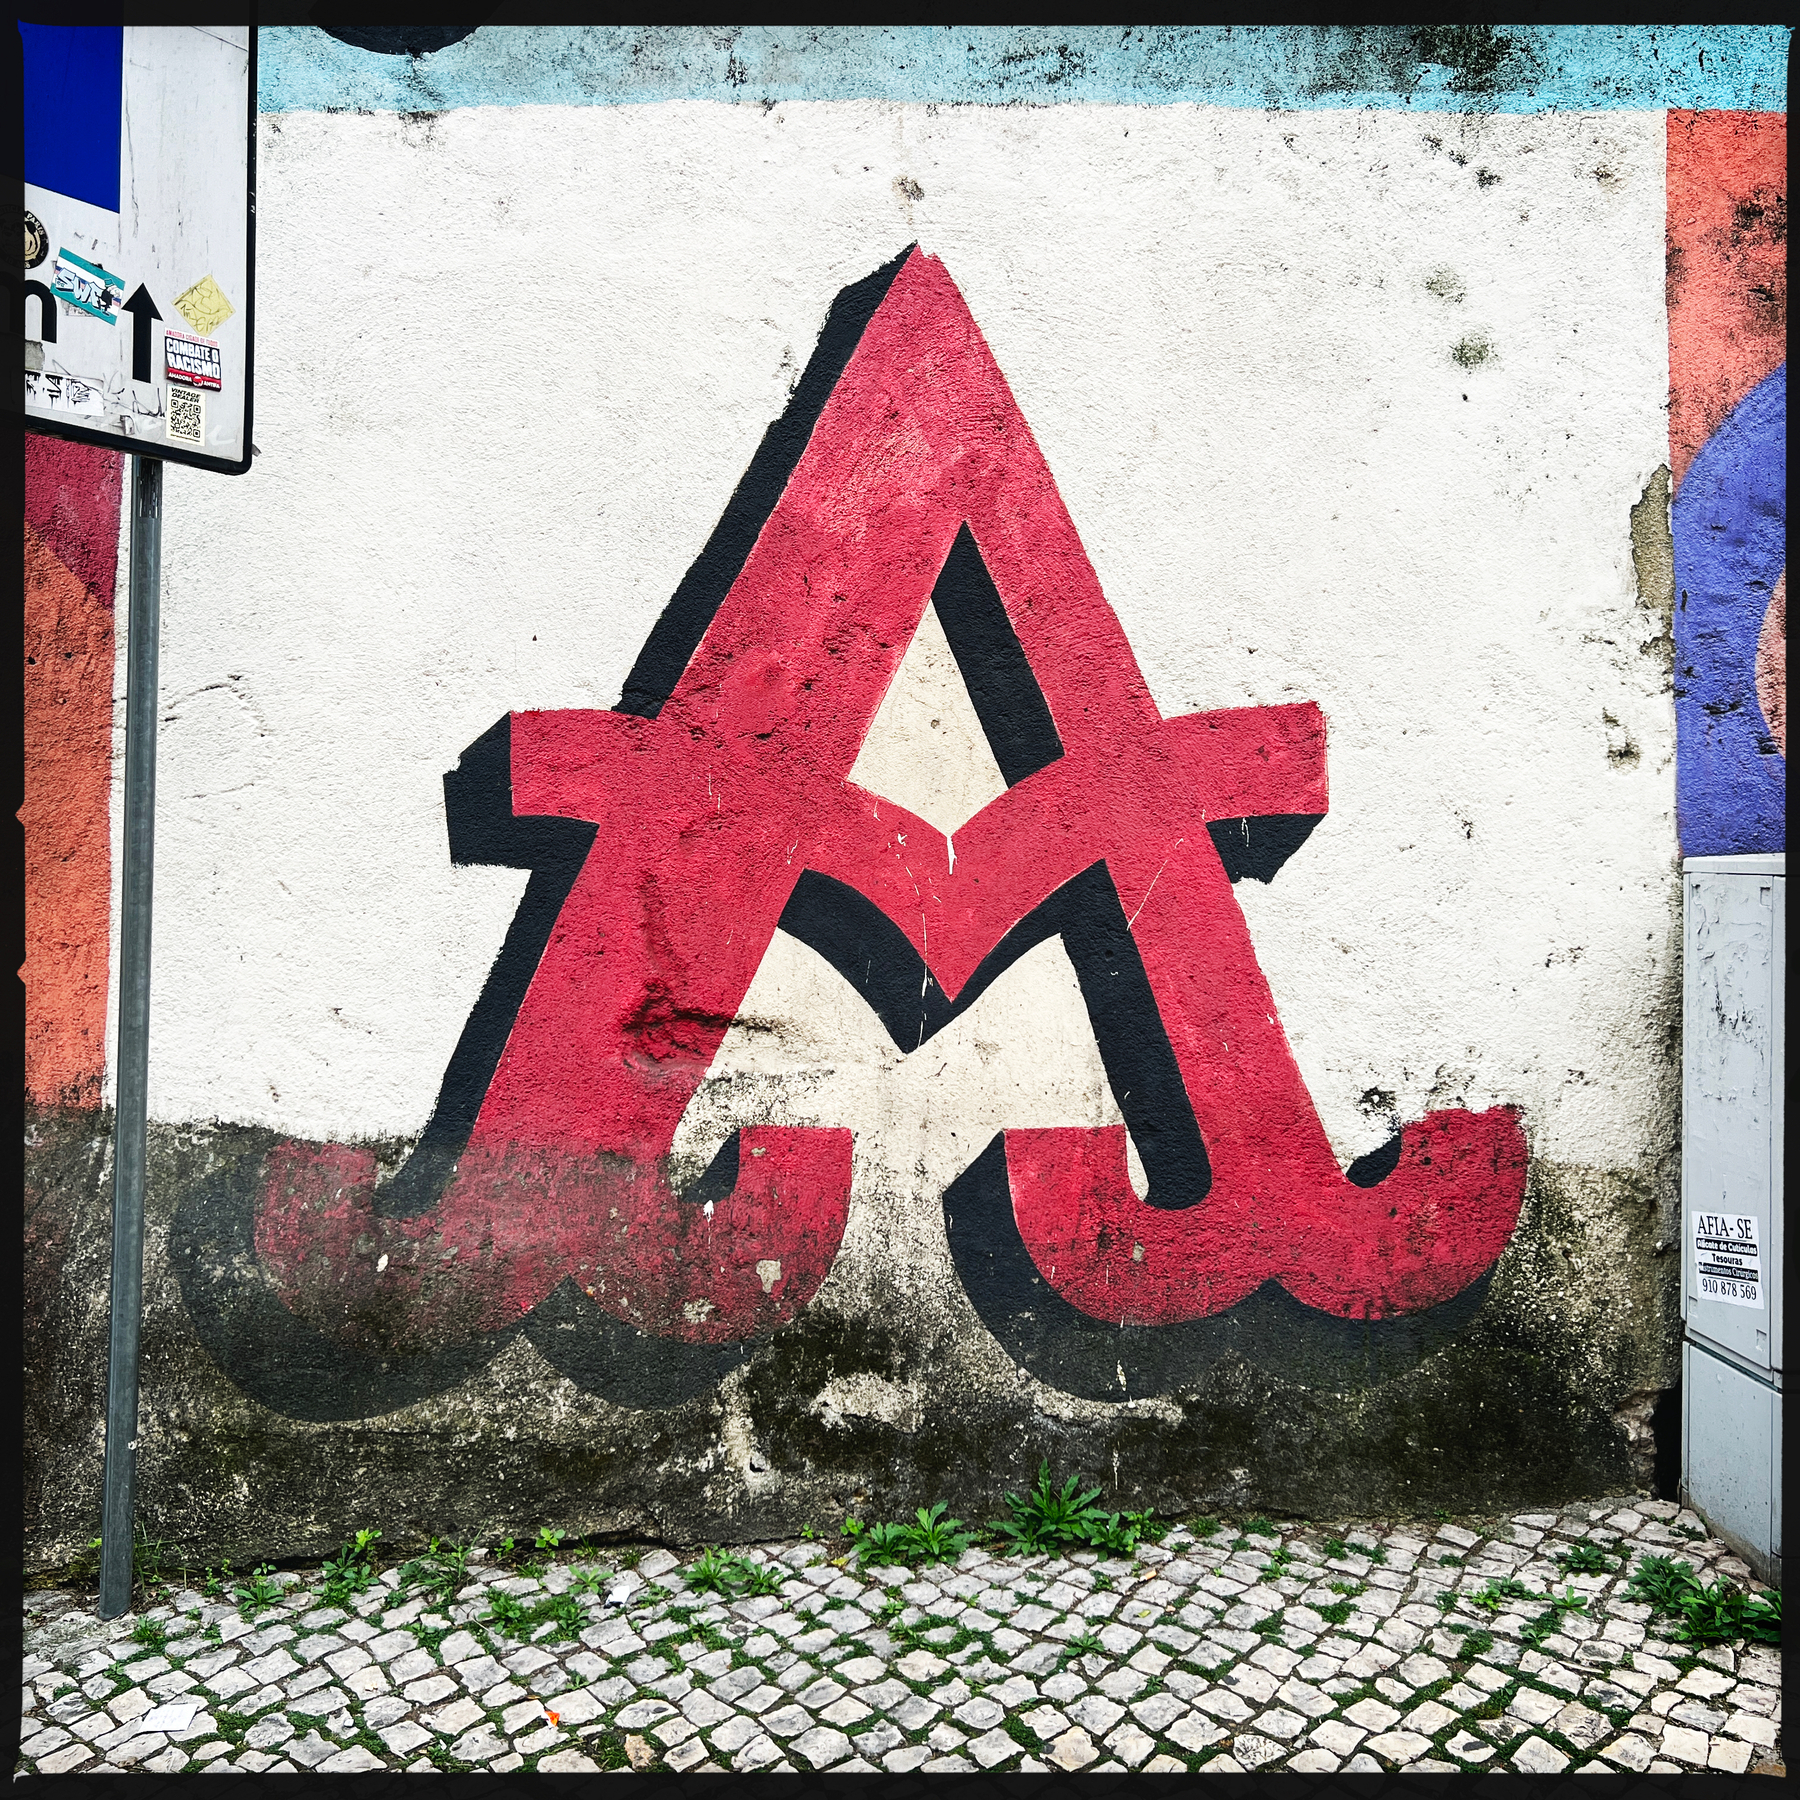 The letter A graffitied onto a wall